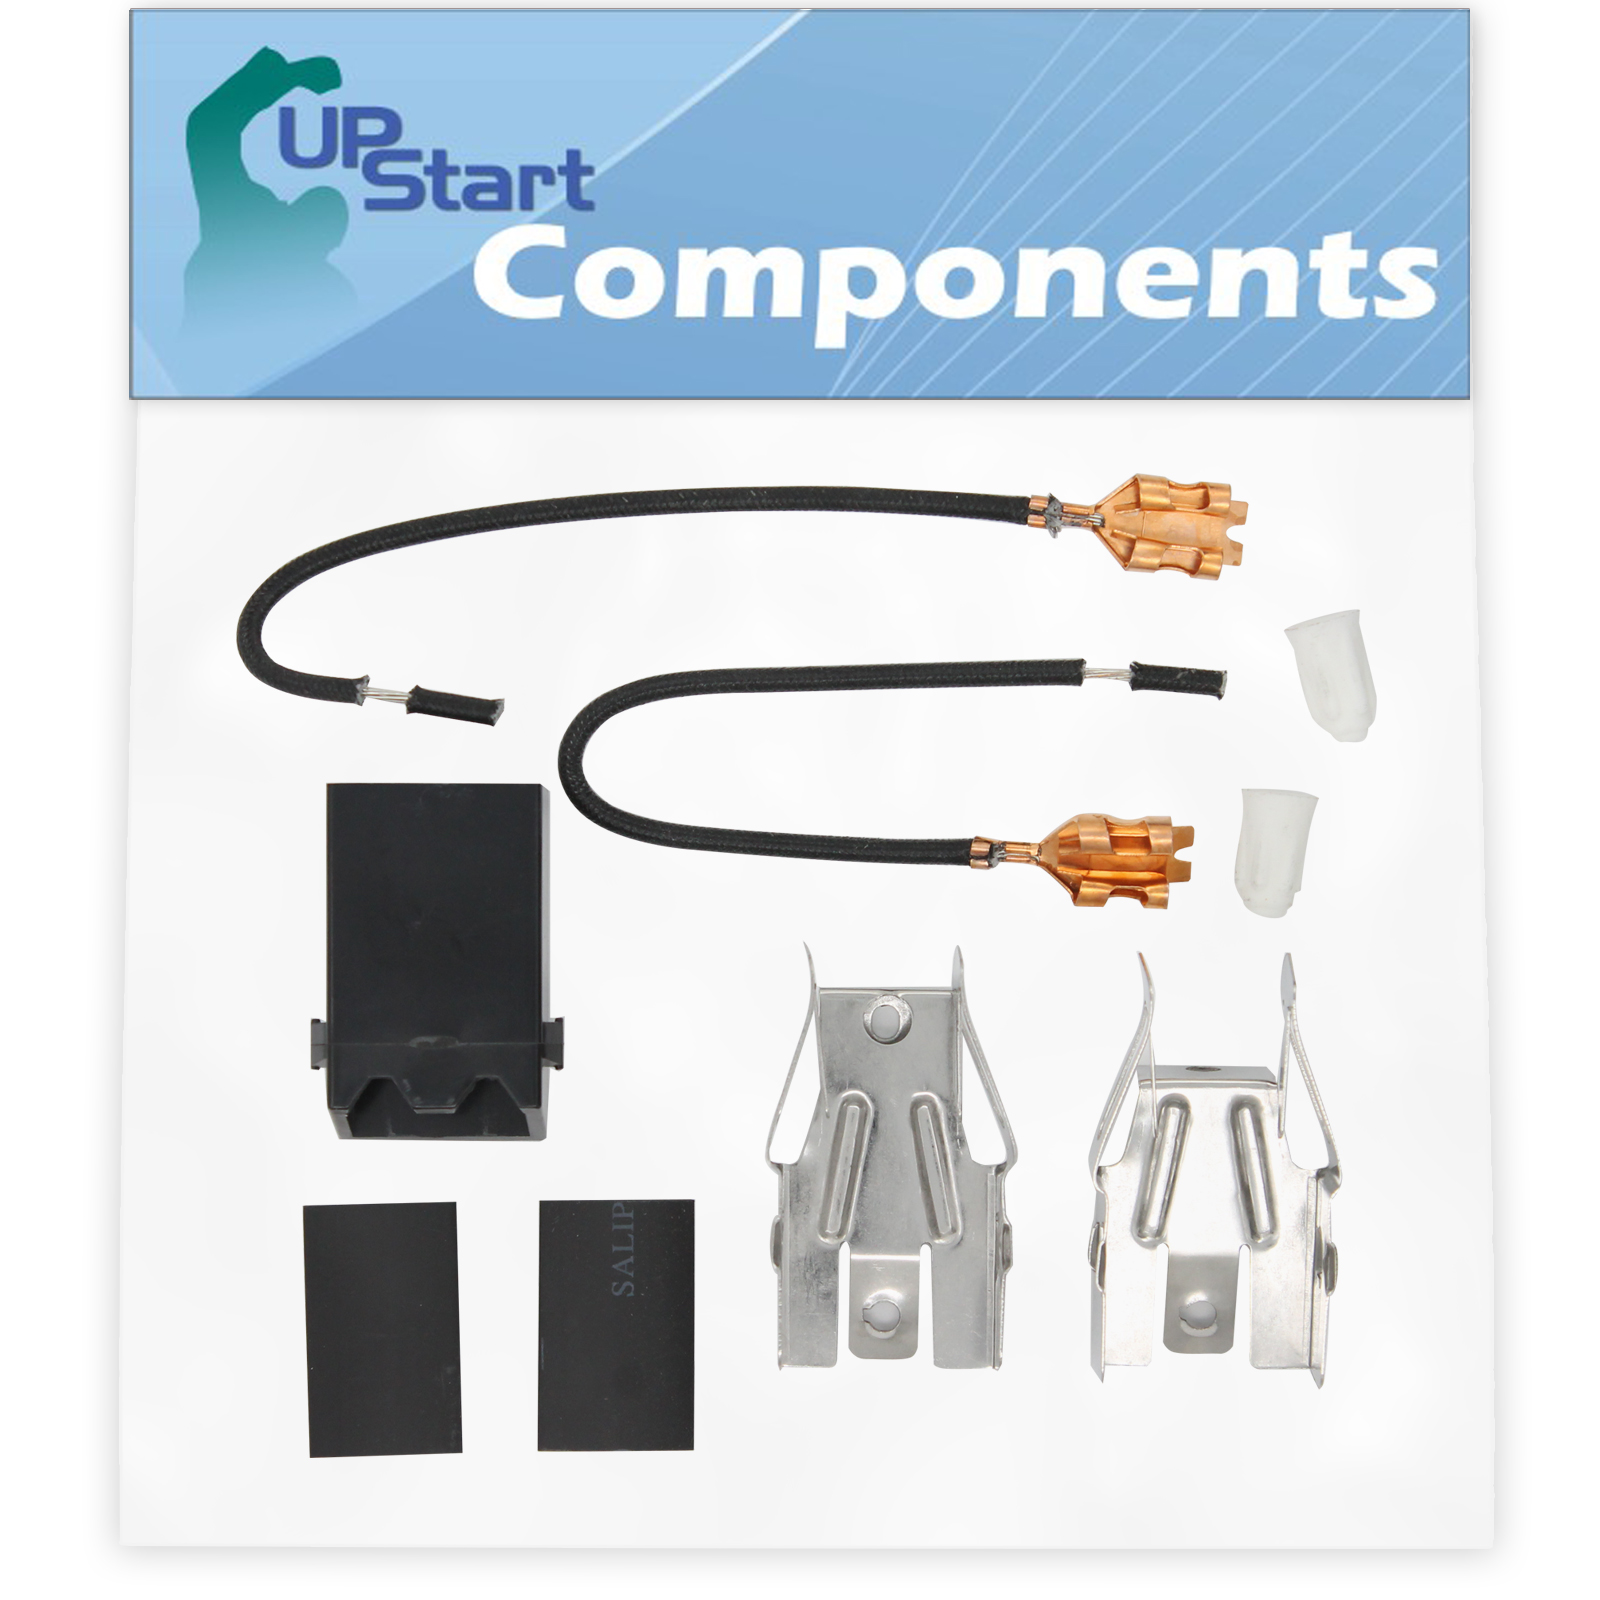 330031 Top Burner Receptacle Kit Replacement for Amana 631.003 Range/Cooktop/Oven - Compatible with 330031 Range Burner Receptacle Kit - UpStart Components Brand - image 1 of 4